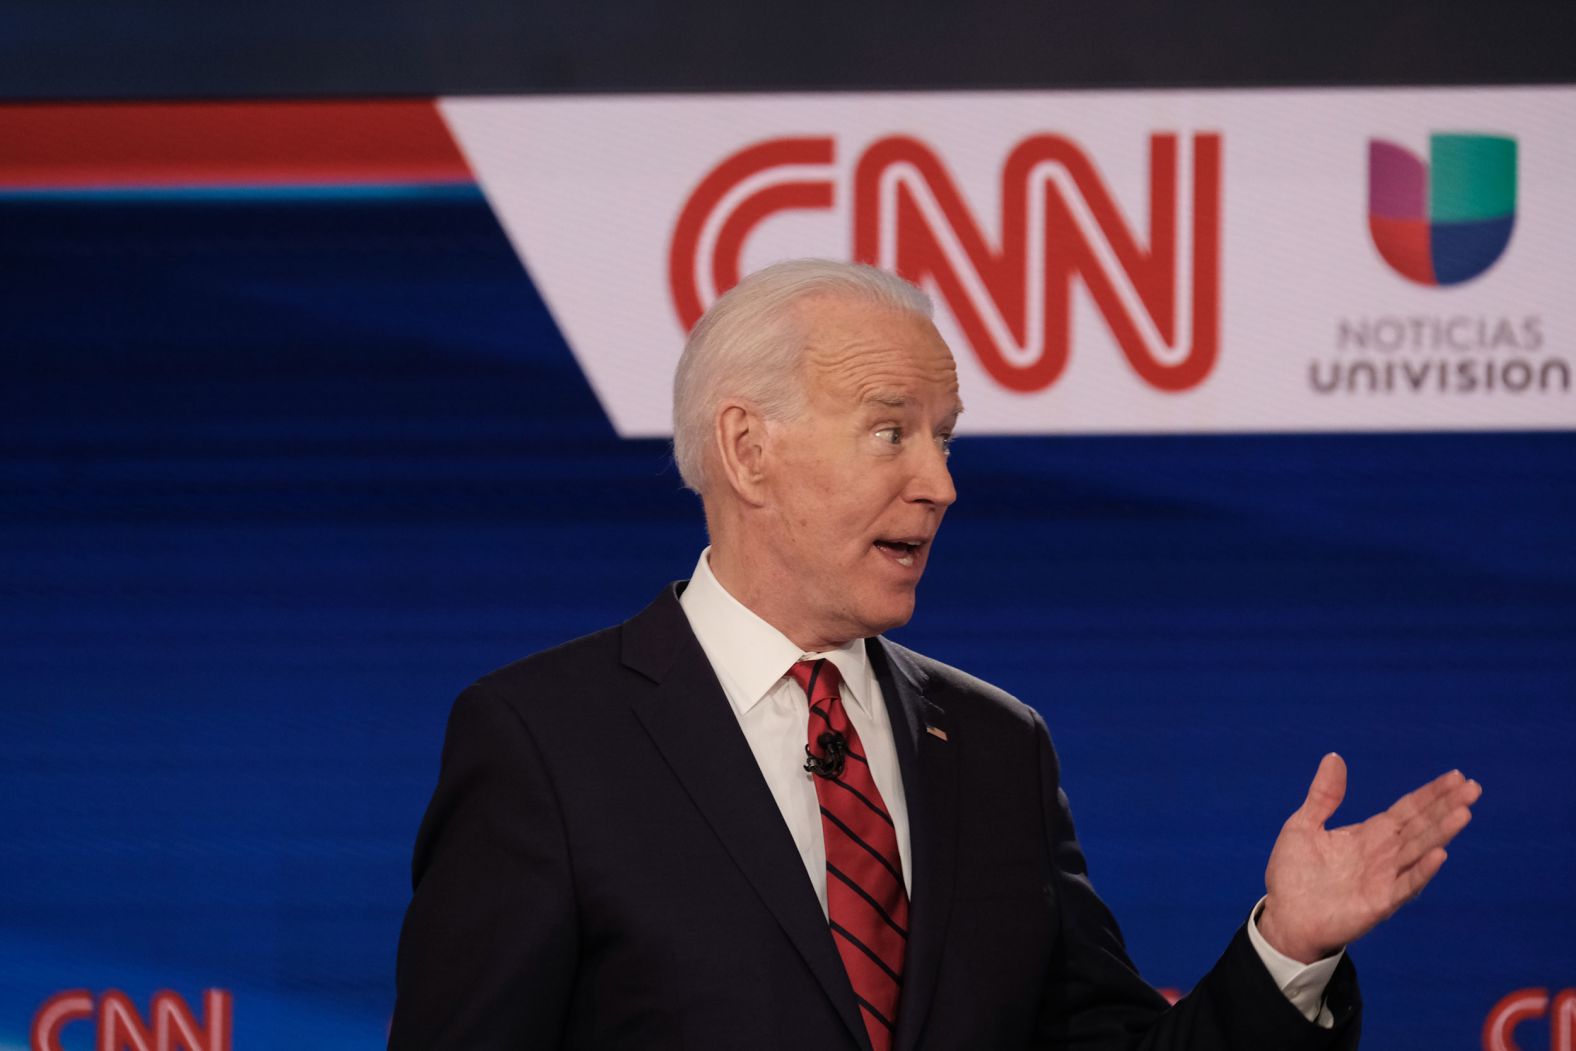 "People are looking for results, not a revolution," Biden said. "They want to deal with the results they need right now."